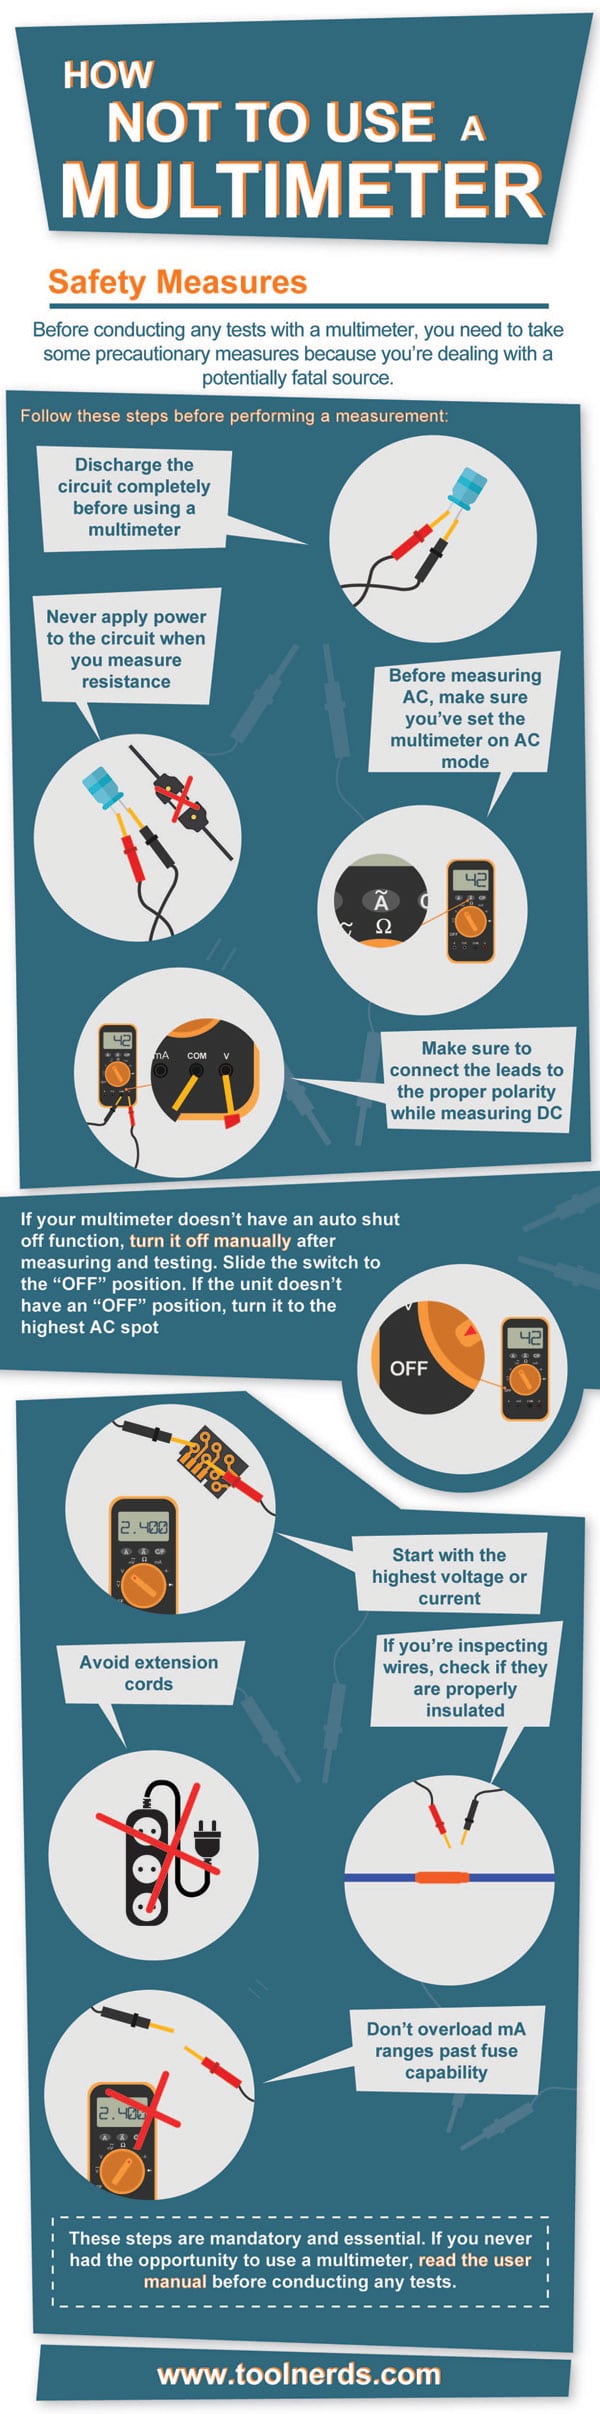 Multimeter safety measures infographic